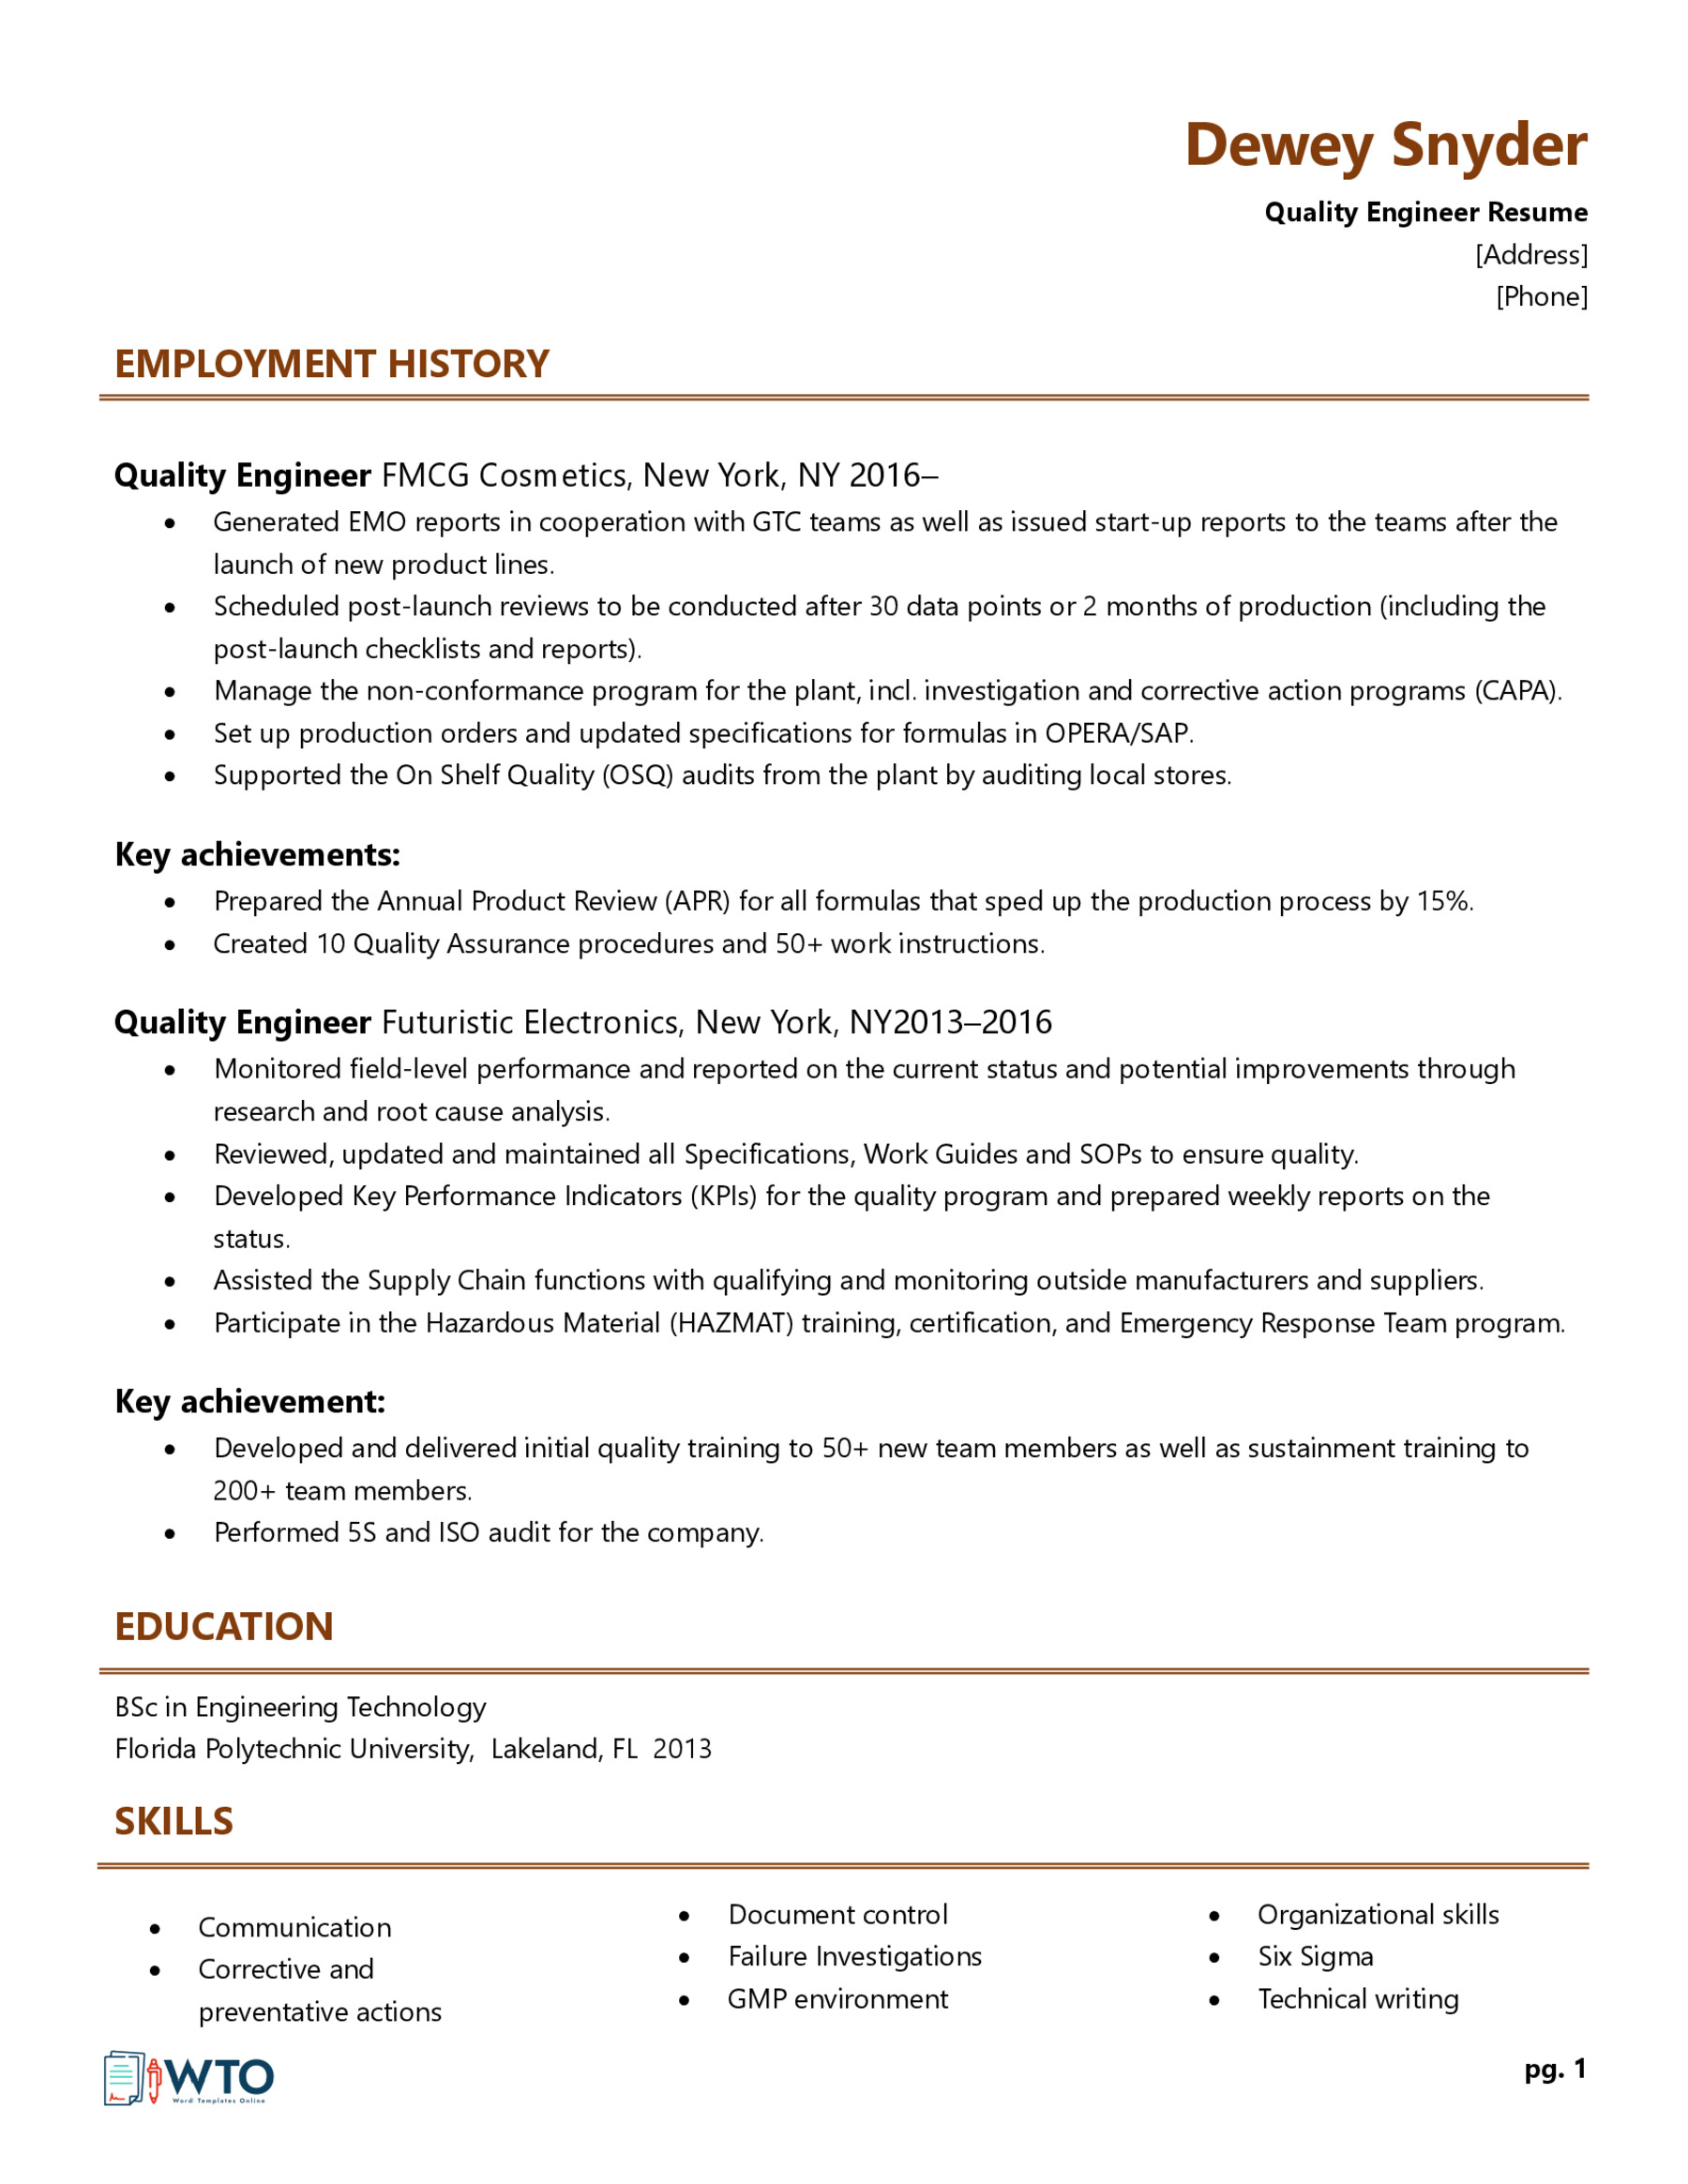 Quality Engineer Resume Template - Creative Example